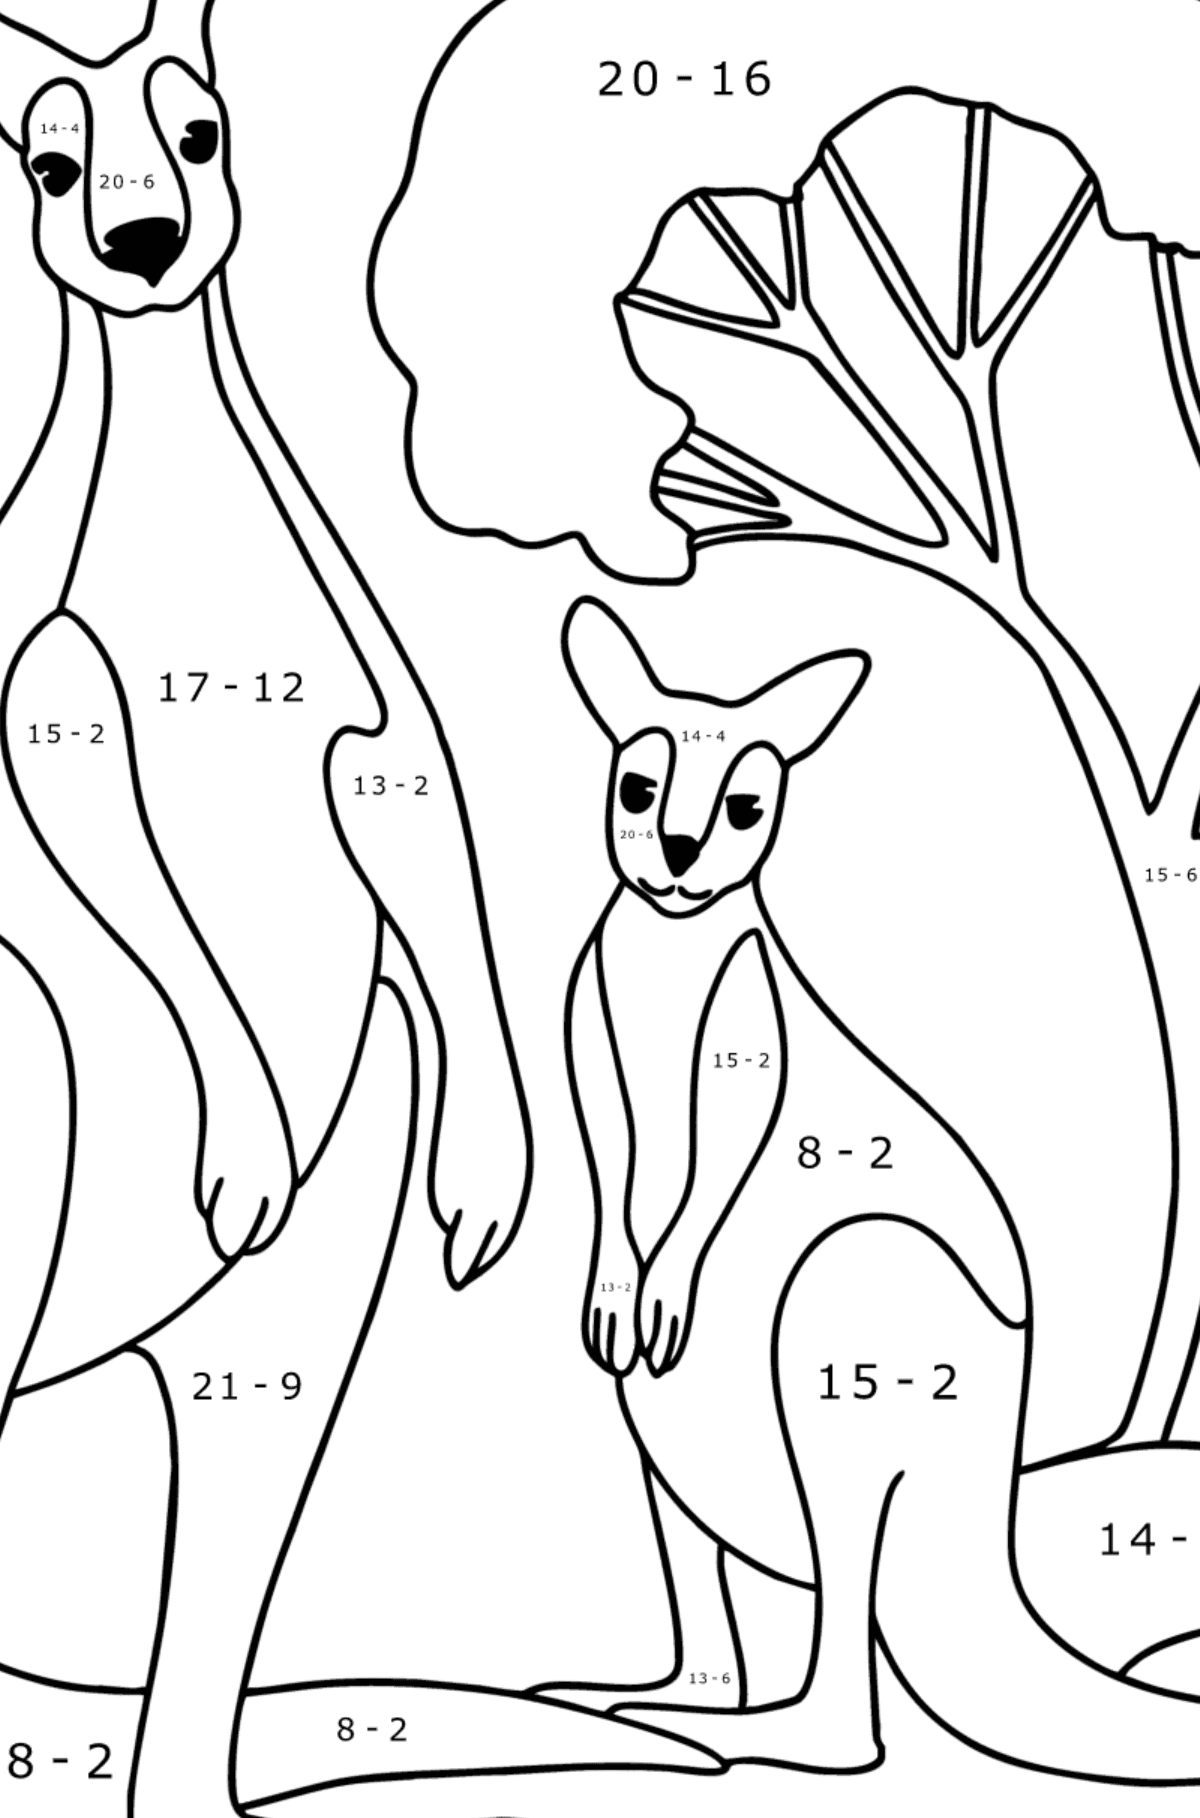 Kangaroo with Baby Coloring Page - Math Coloring - Subtraction for Kids